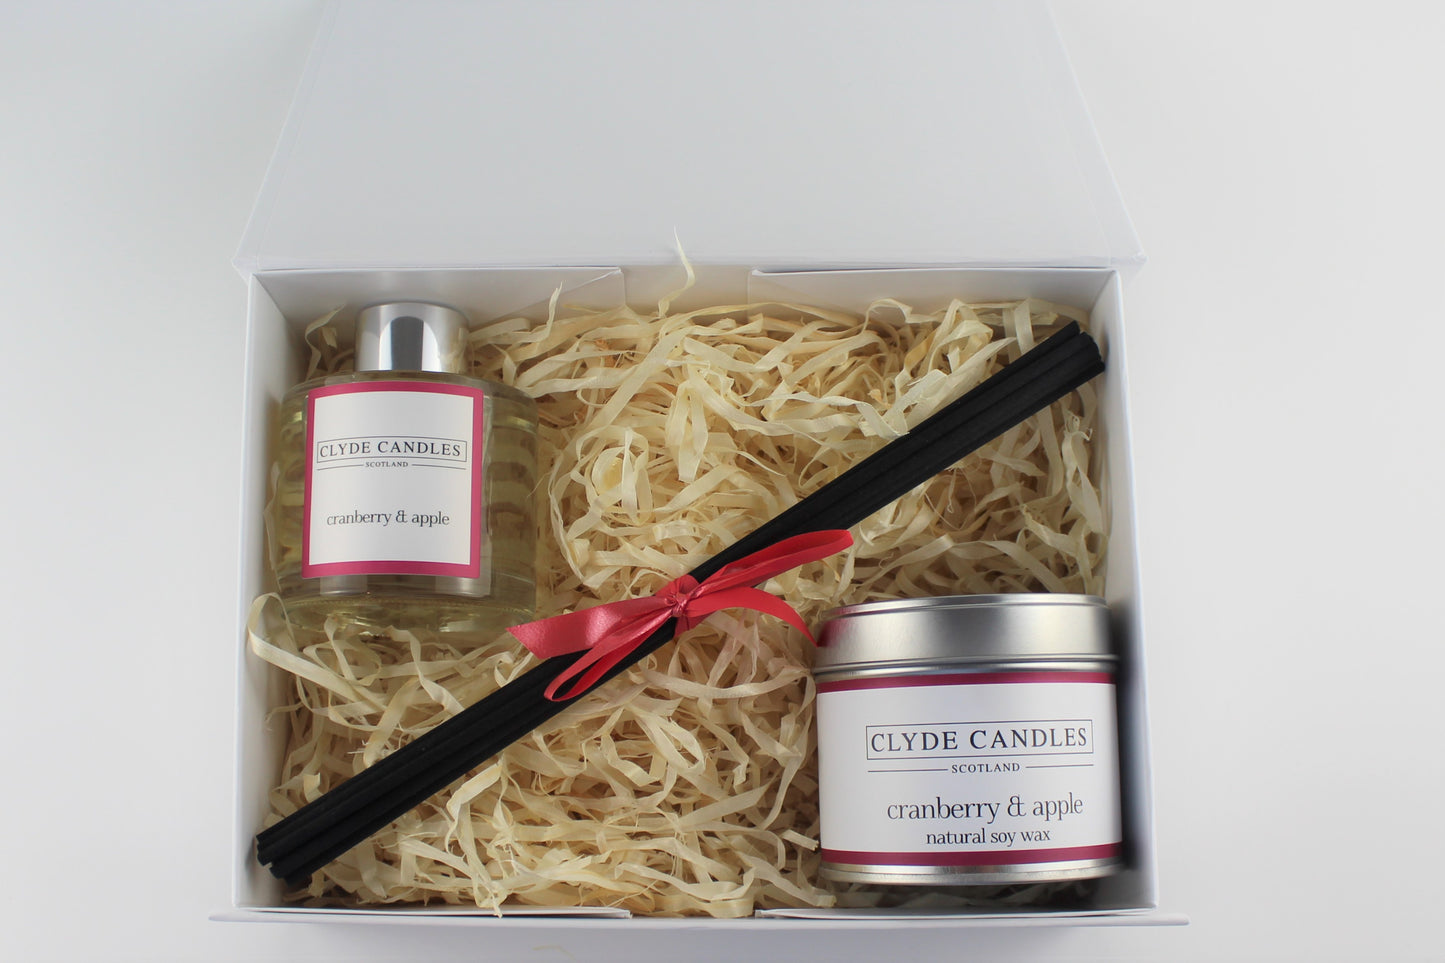 Cranberry & Apple Diffuser & Candle Gift Box Set - Scottish Natural Soy Candle